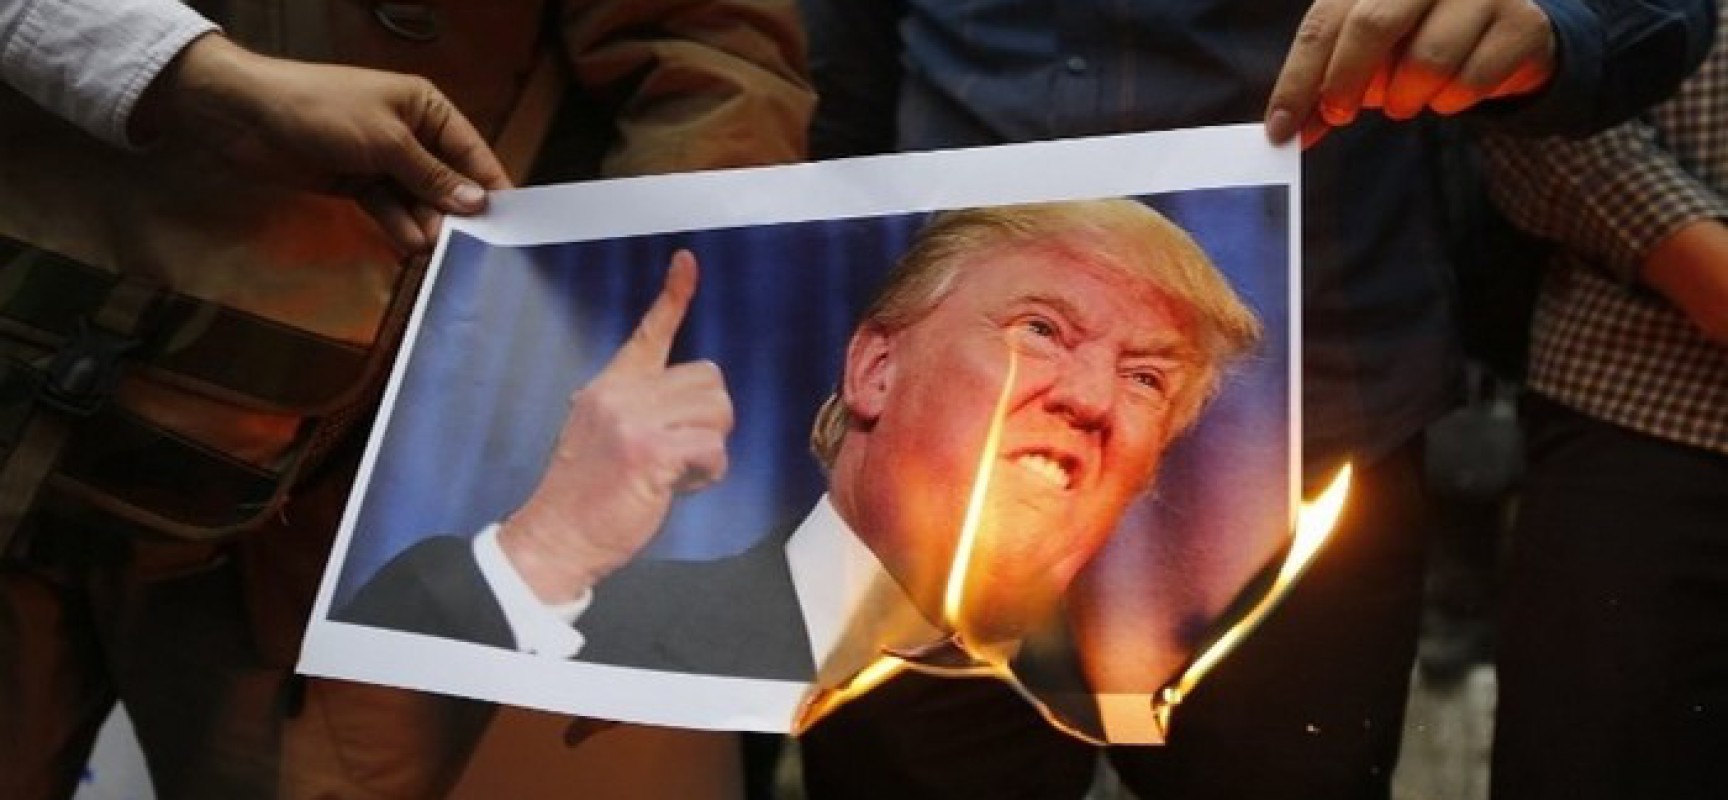 Iranians burn an image of US President Donald Trump during an anti-US demonstration outside the former US embassy headquarters in the capital Tehran on May 9, 2018.
Iranians reacted with a mix of sadness, resignation and defiance on May 9 to US President Donald Trump's withdrawal from the nuclear deal, with sharp divisions among officials on how best to respond.
For many, Trump's decision on Tuesday to pull out of the landmark nuclear deal marked the final death knell for the hope created when it was signed in 2015 that Iran might finally escape decades of isolation and US hostility.  / AFP PHOTO / ATTA KENARE